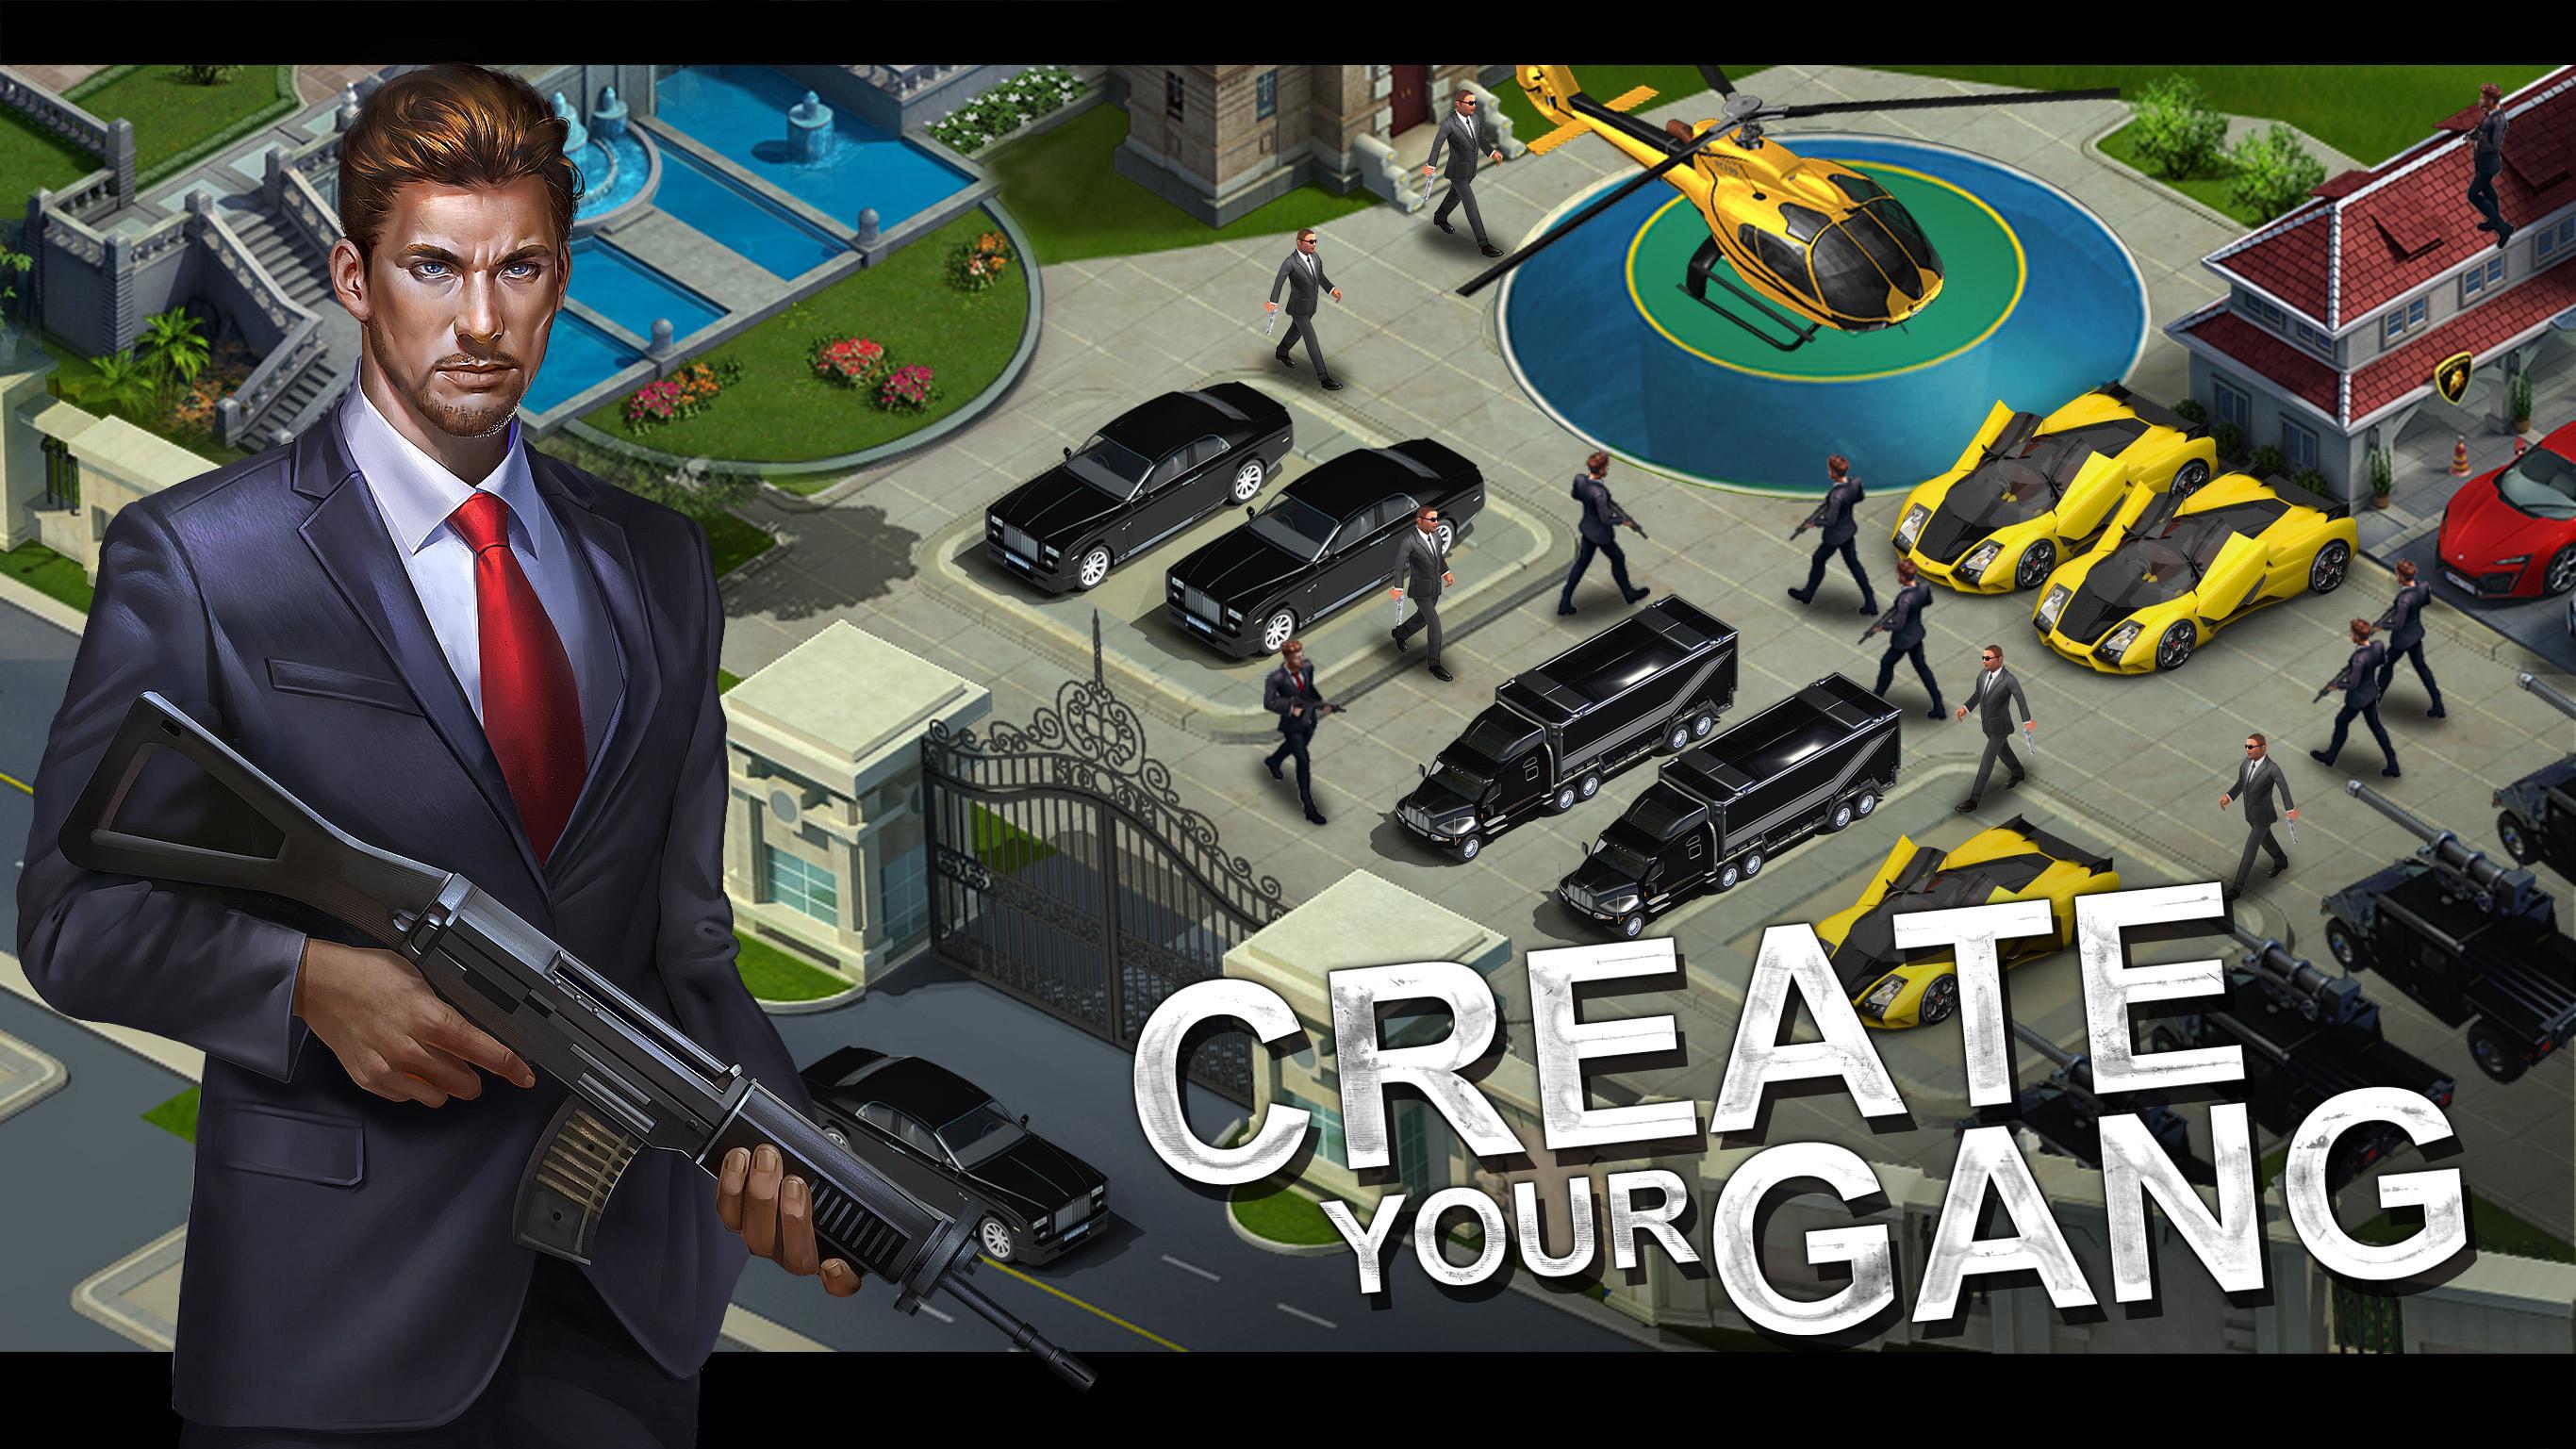 Mafia City for Android - APK Download - 